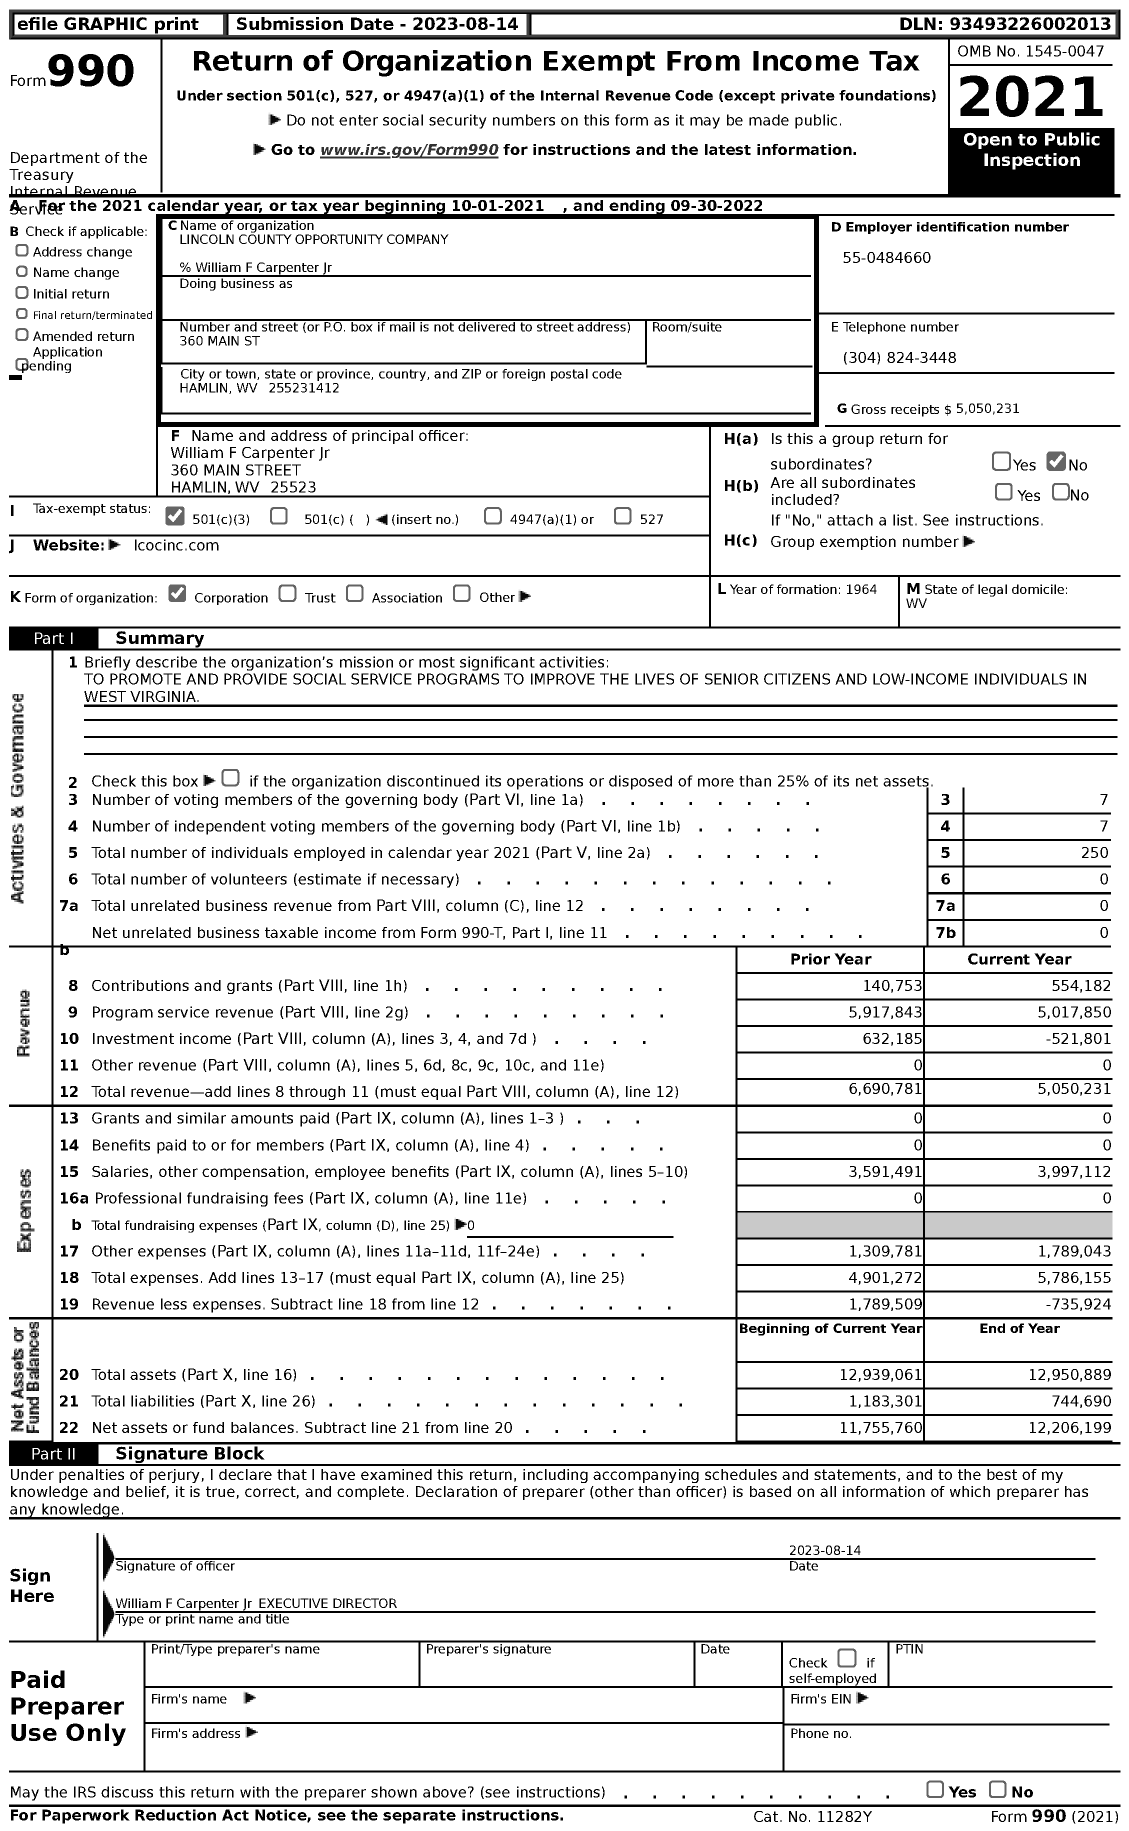 Image of first page of 2021 Form 990 for Lincoln County Opportunity Company (LCOC)